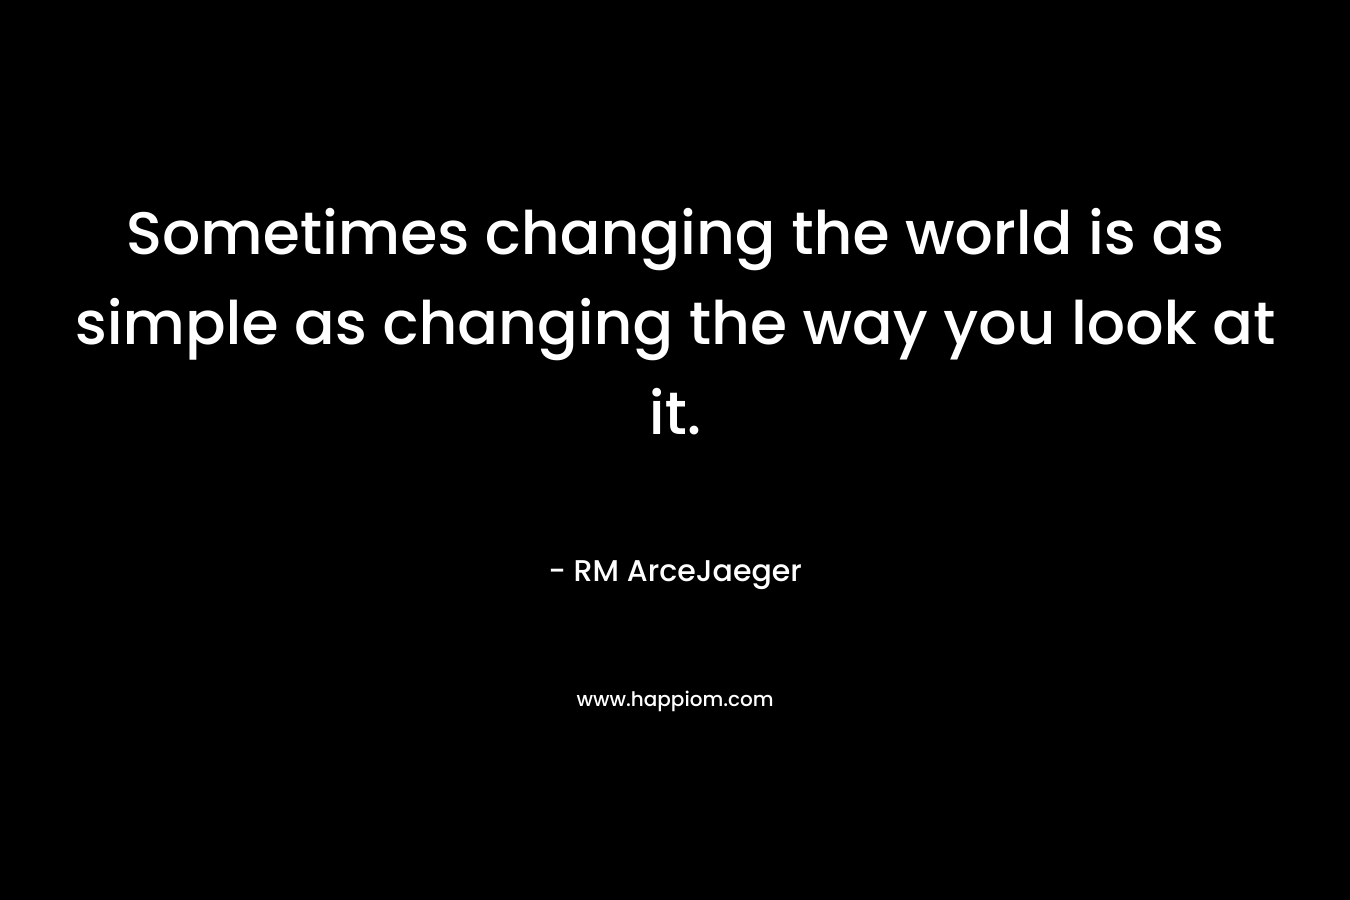 Sometimes changing the world is as simple as changing the way you look at it.